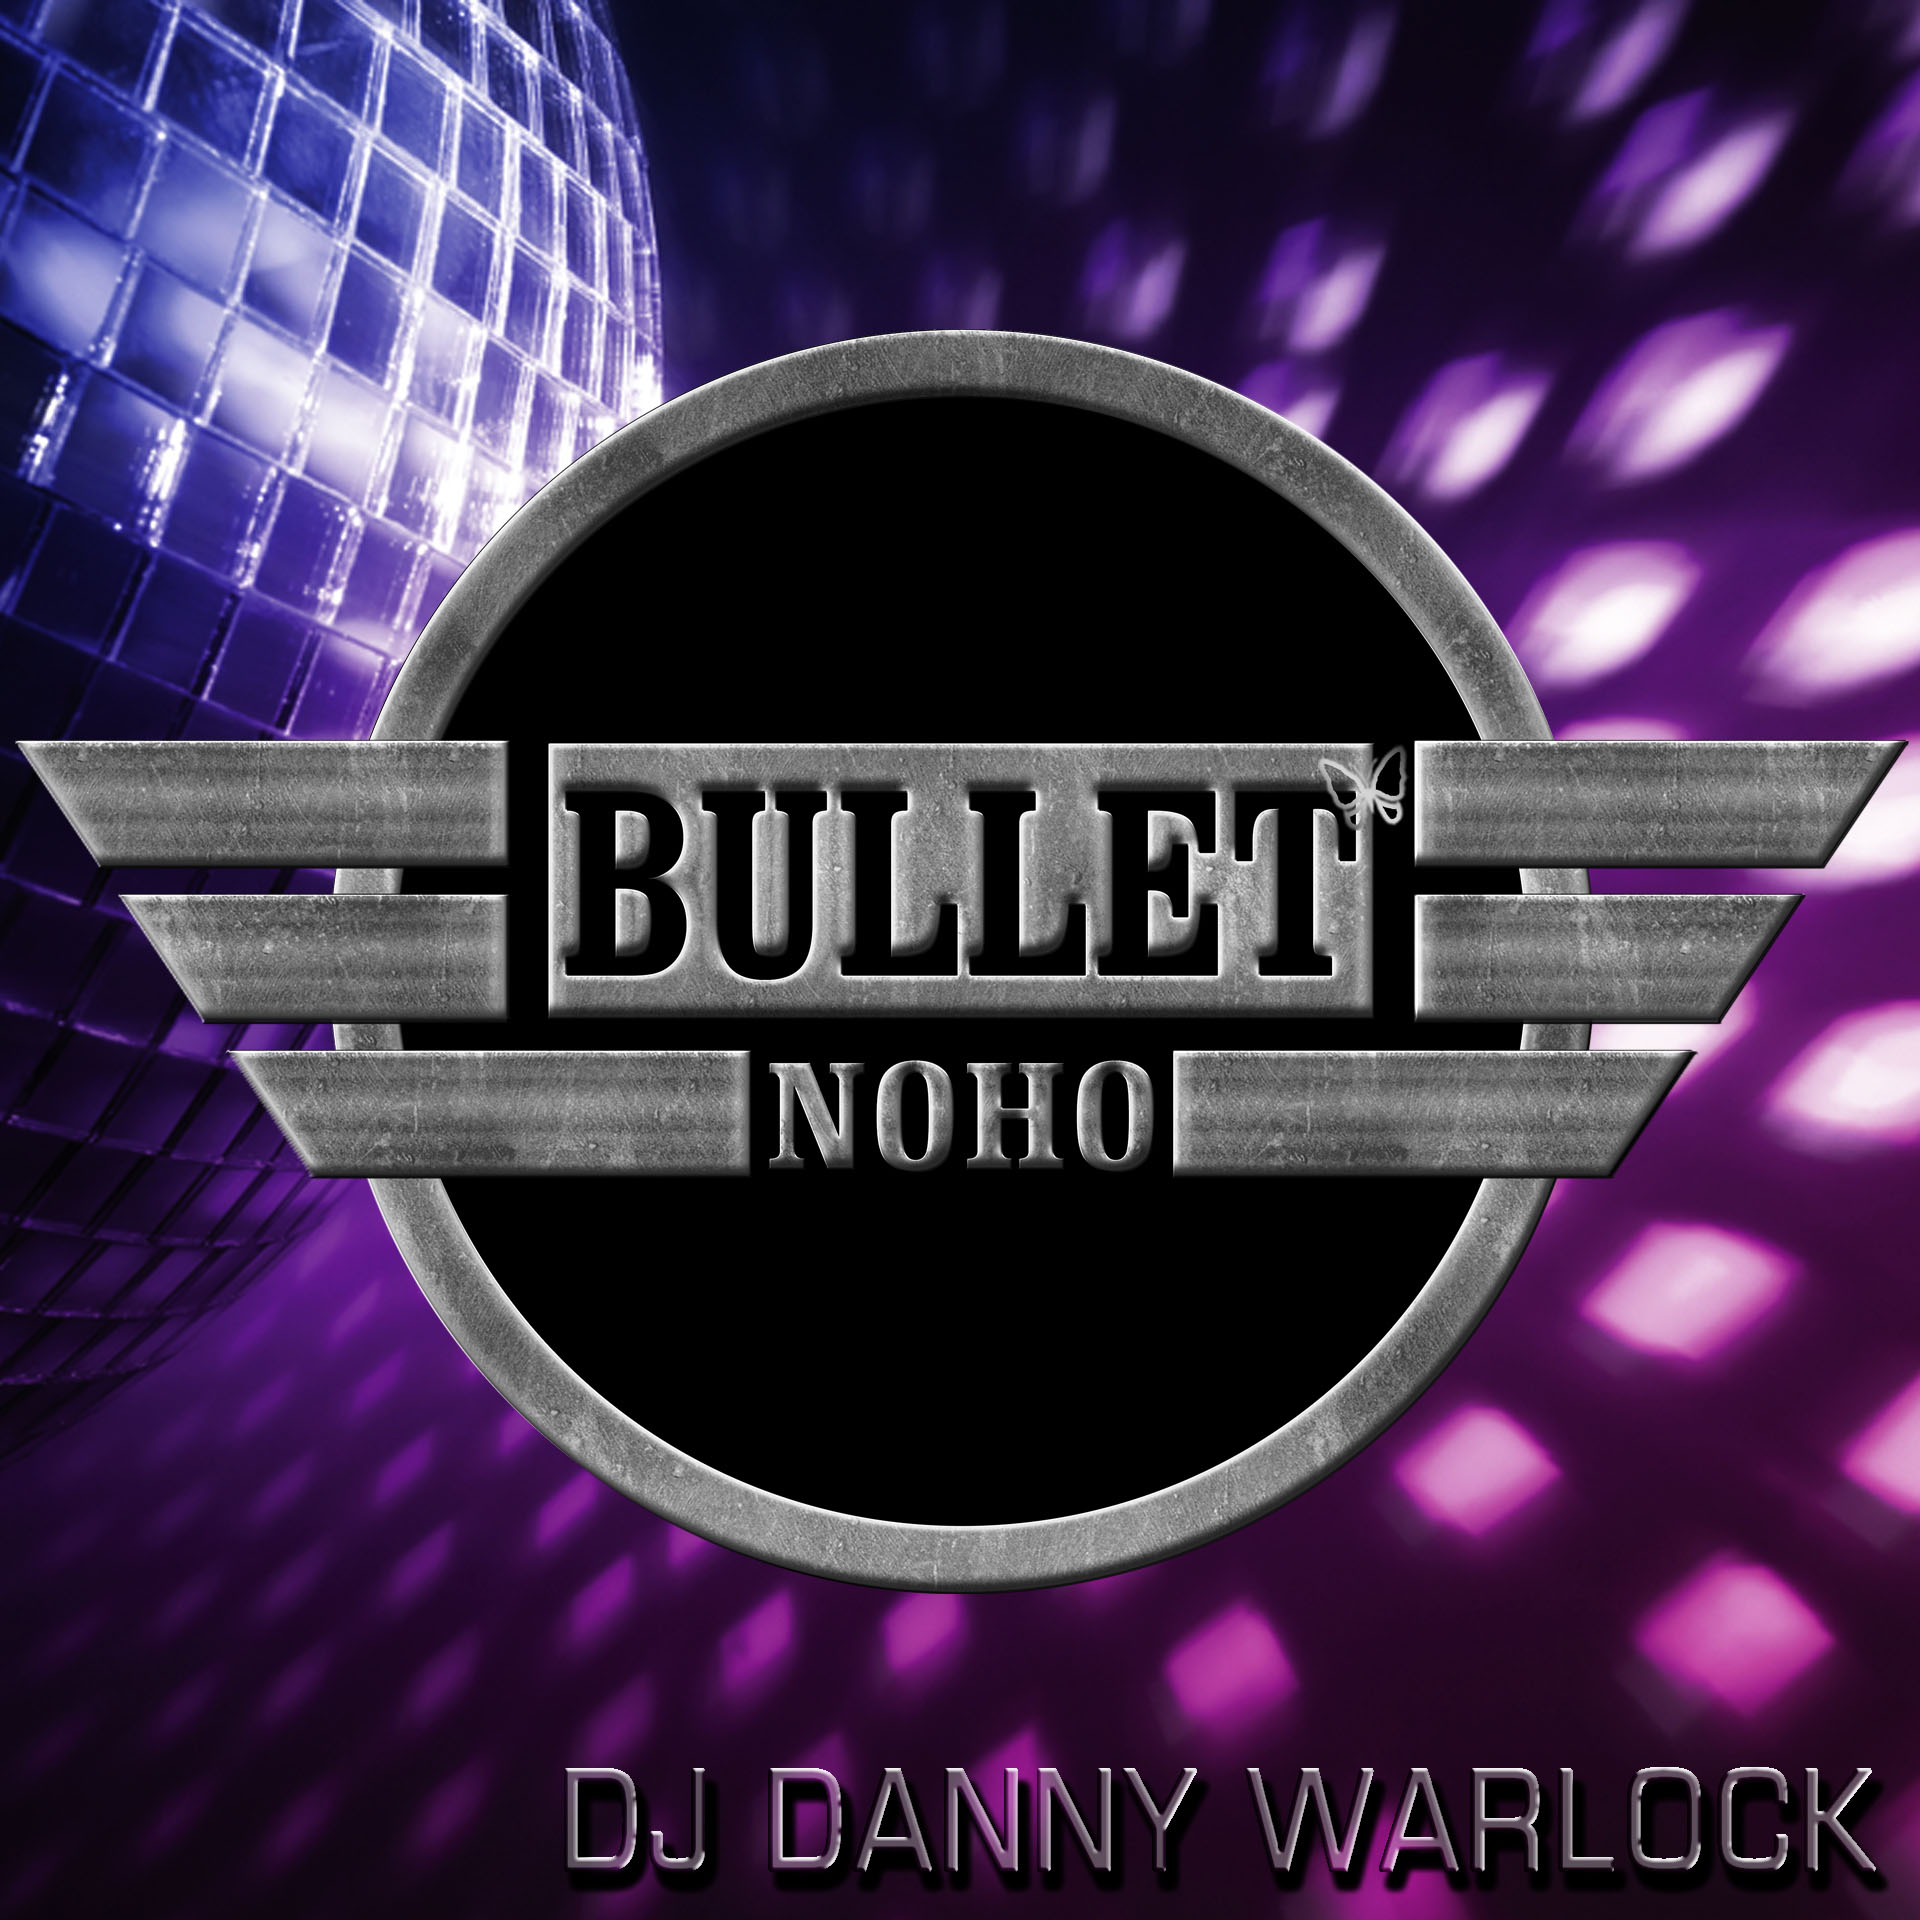 DJ DANNY WARLOCK: Sunday, 03/10/24 from 3:00 PM to 8:00 PM